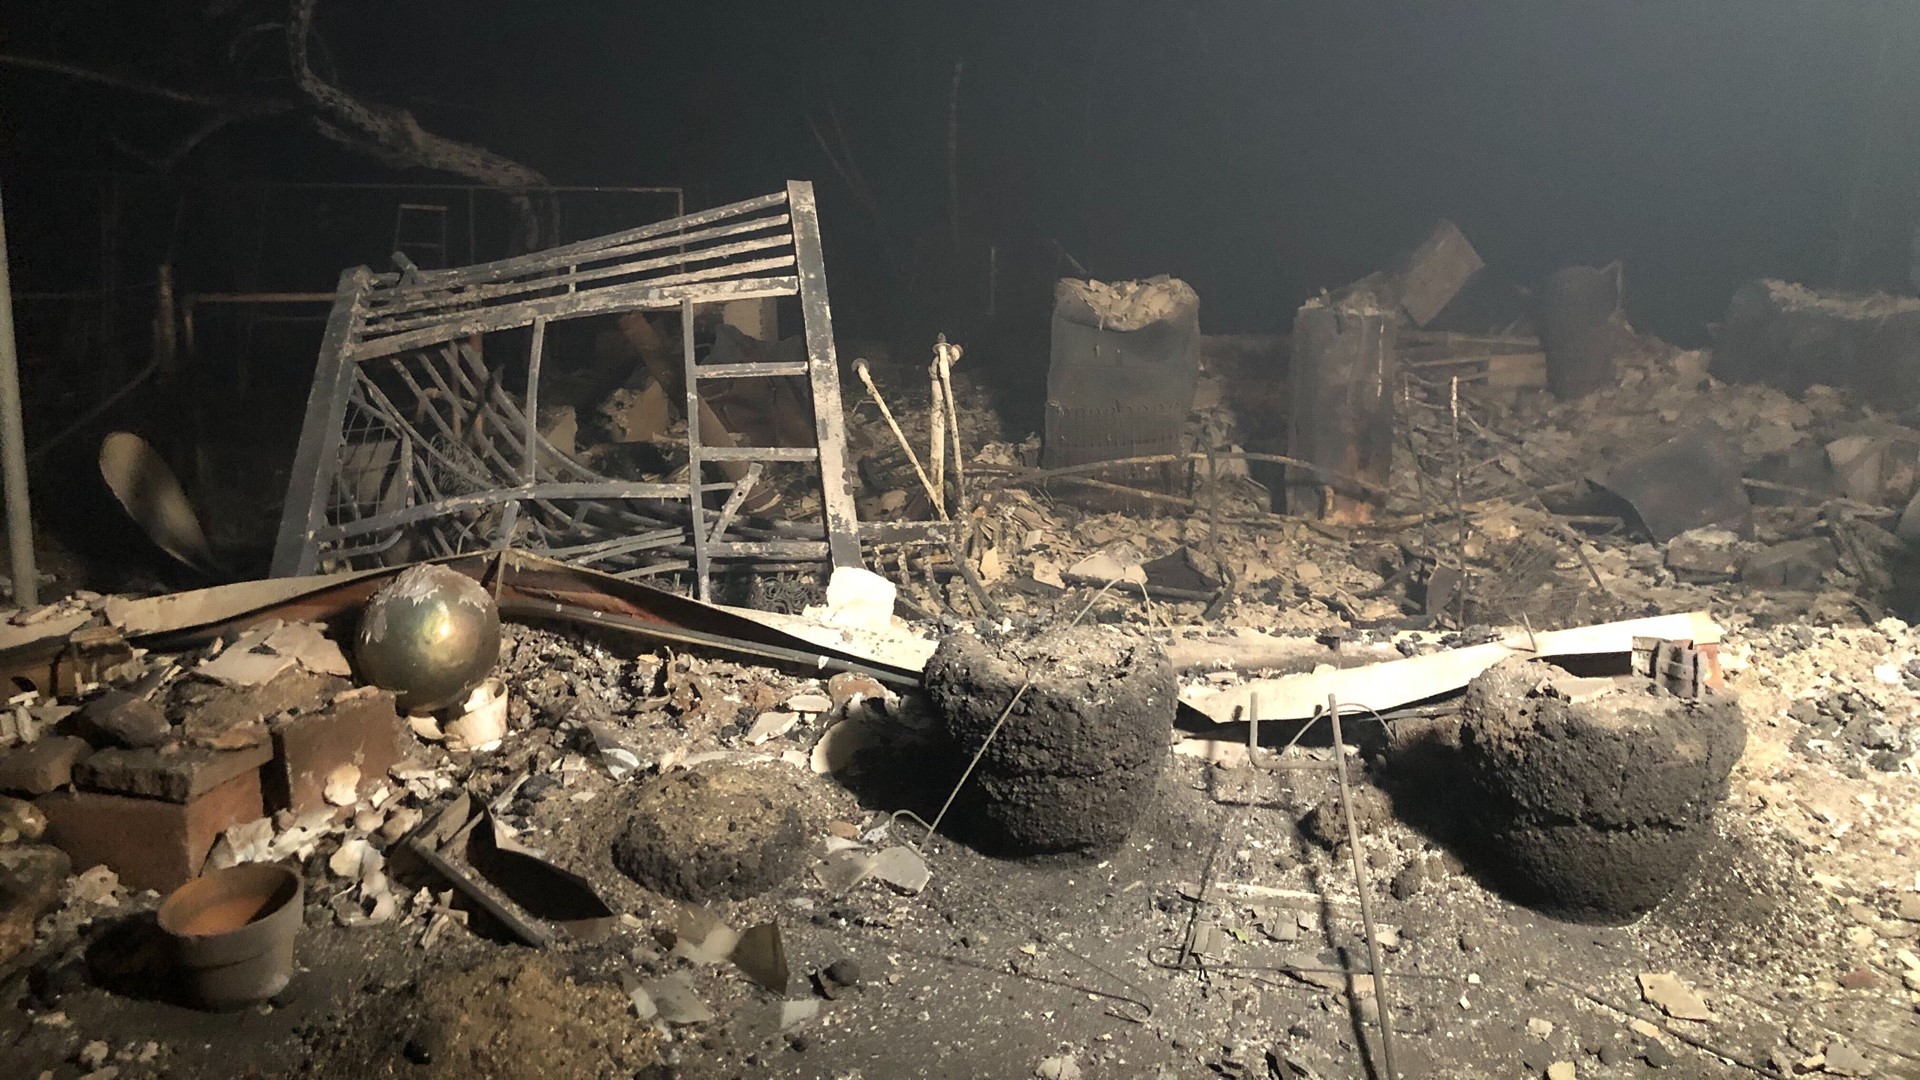 Butte County Sheriff Kory Honea identified the two victims who died in the North Complex Fire as Josiah Williams, 16, and Millicent Catarancuic, 77.